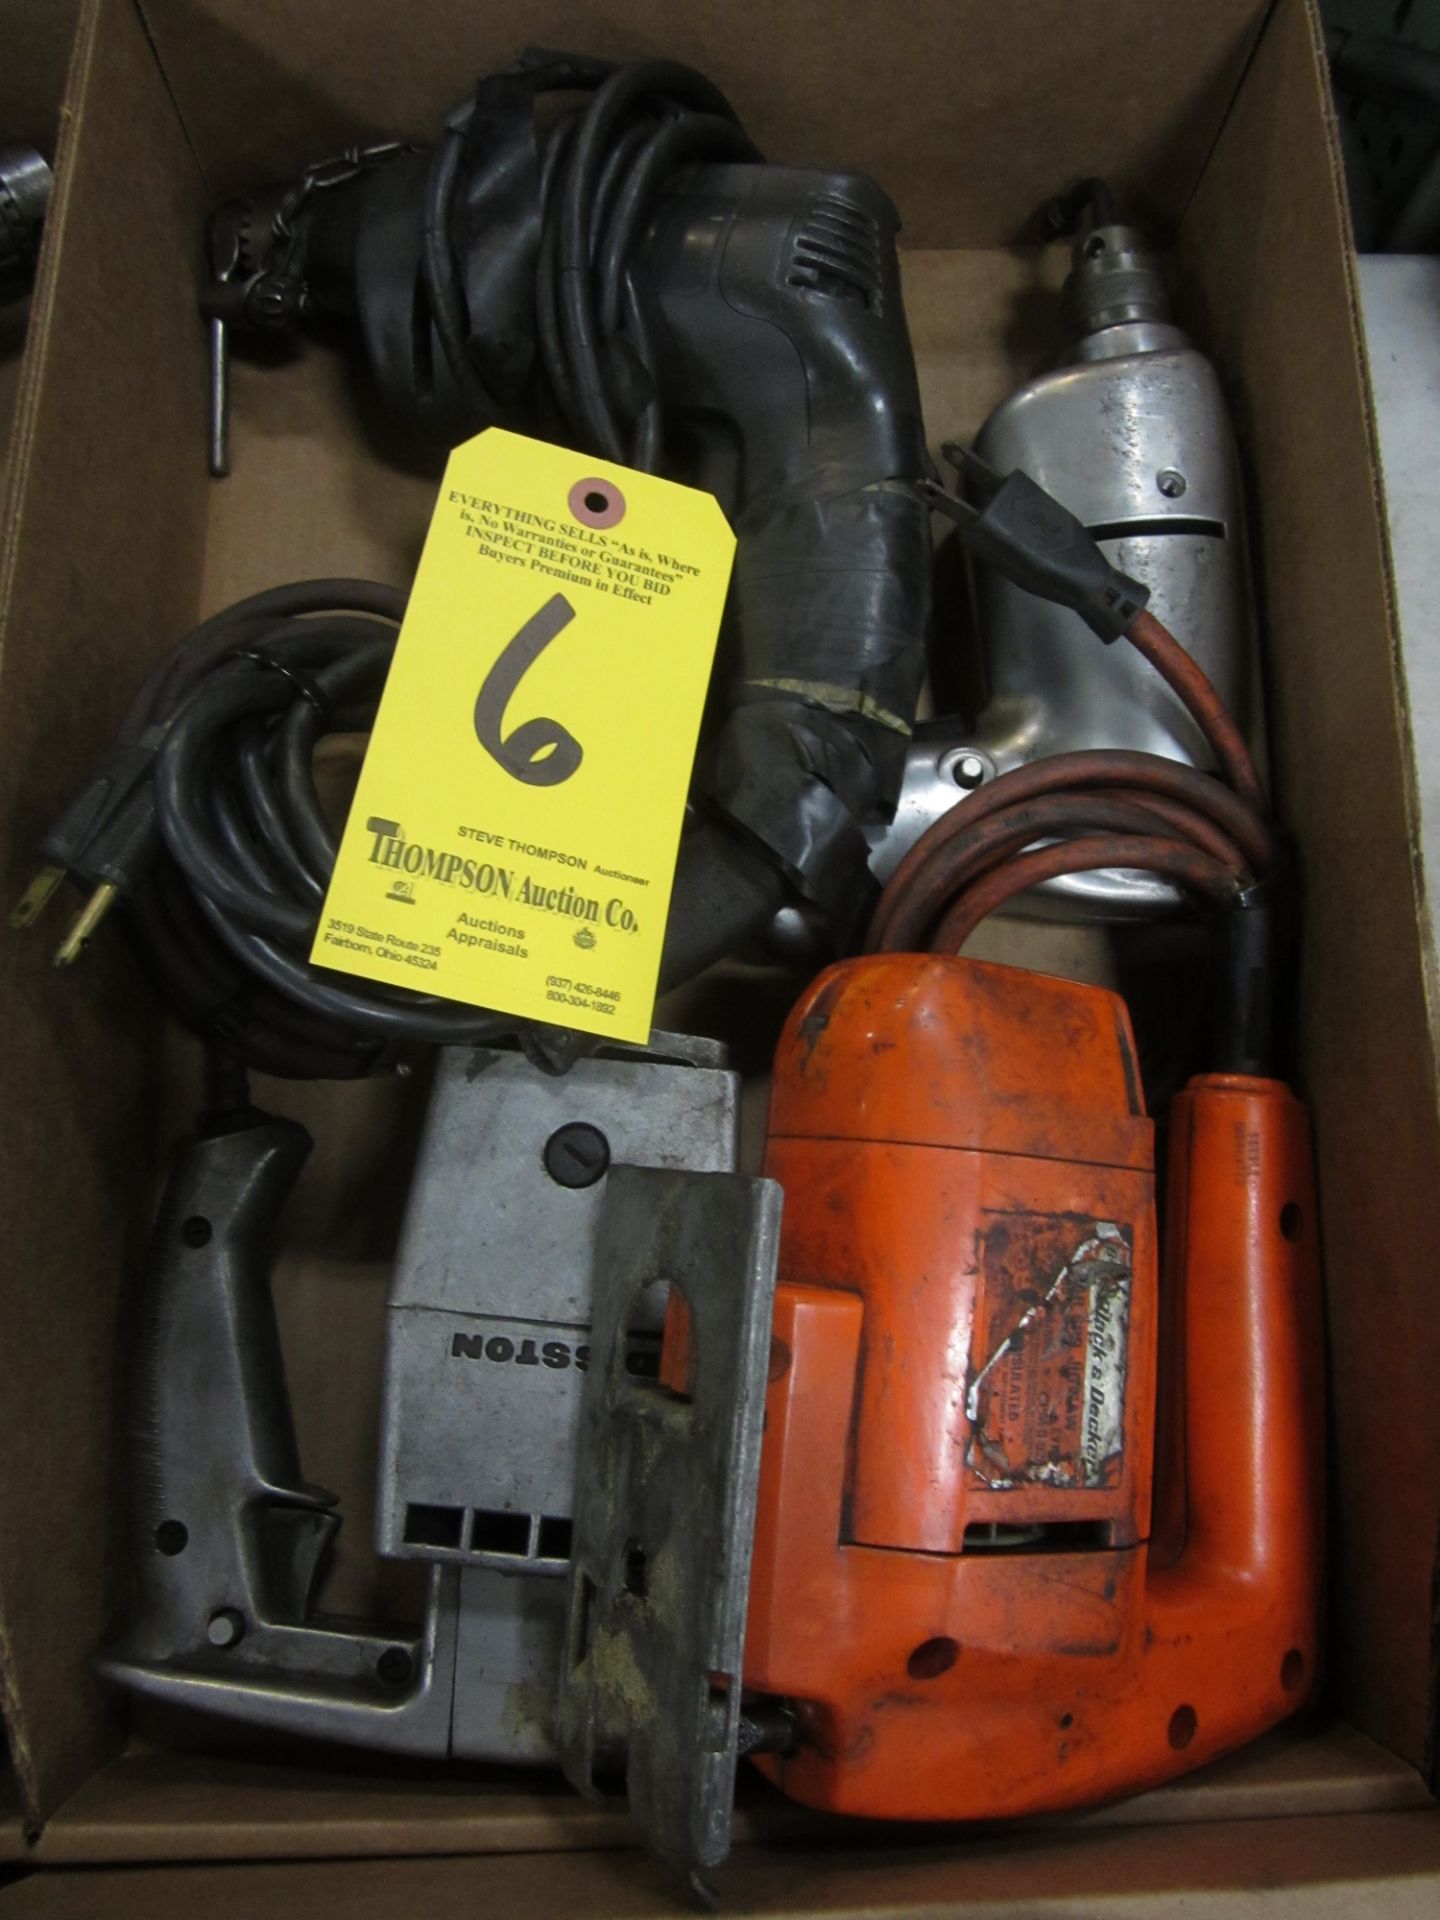 (3) Electric Drills and (1) Jig Saw